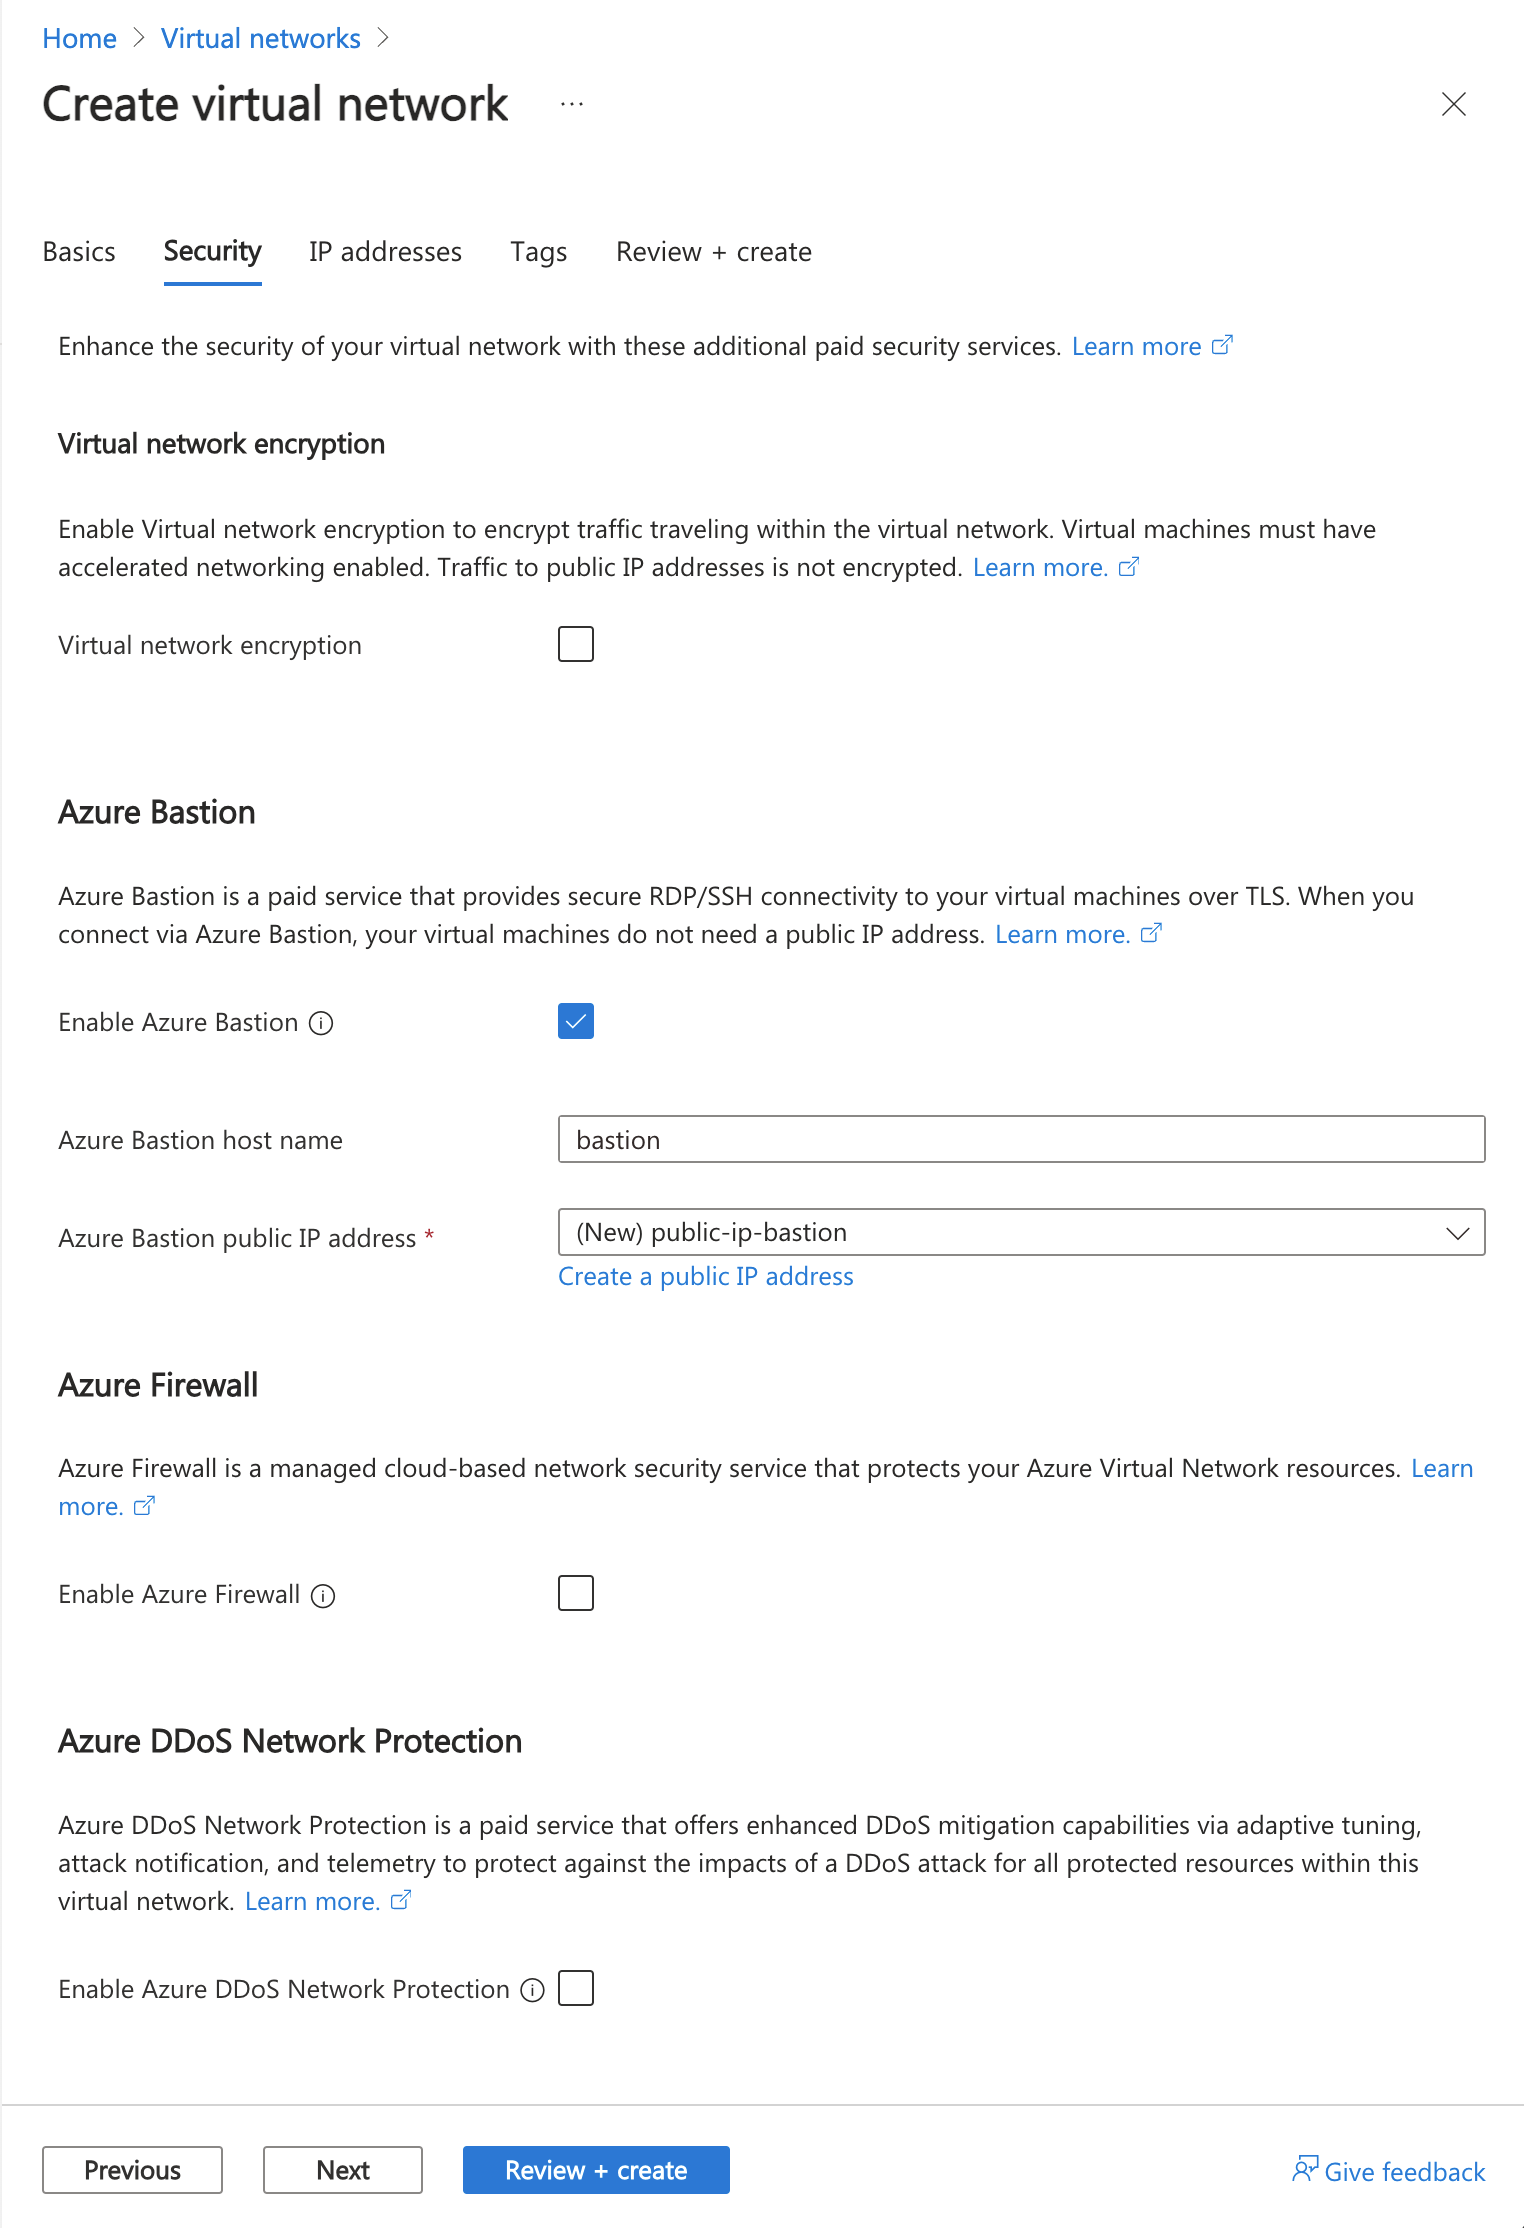 Screenshot of options for enabling an Azure Bastion host as part of creating a virtual network in the Azure portal.